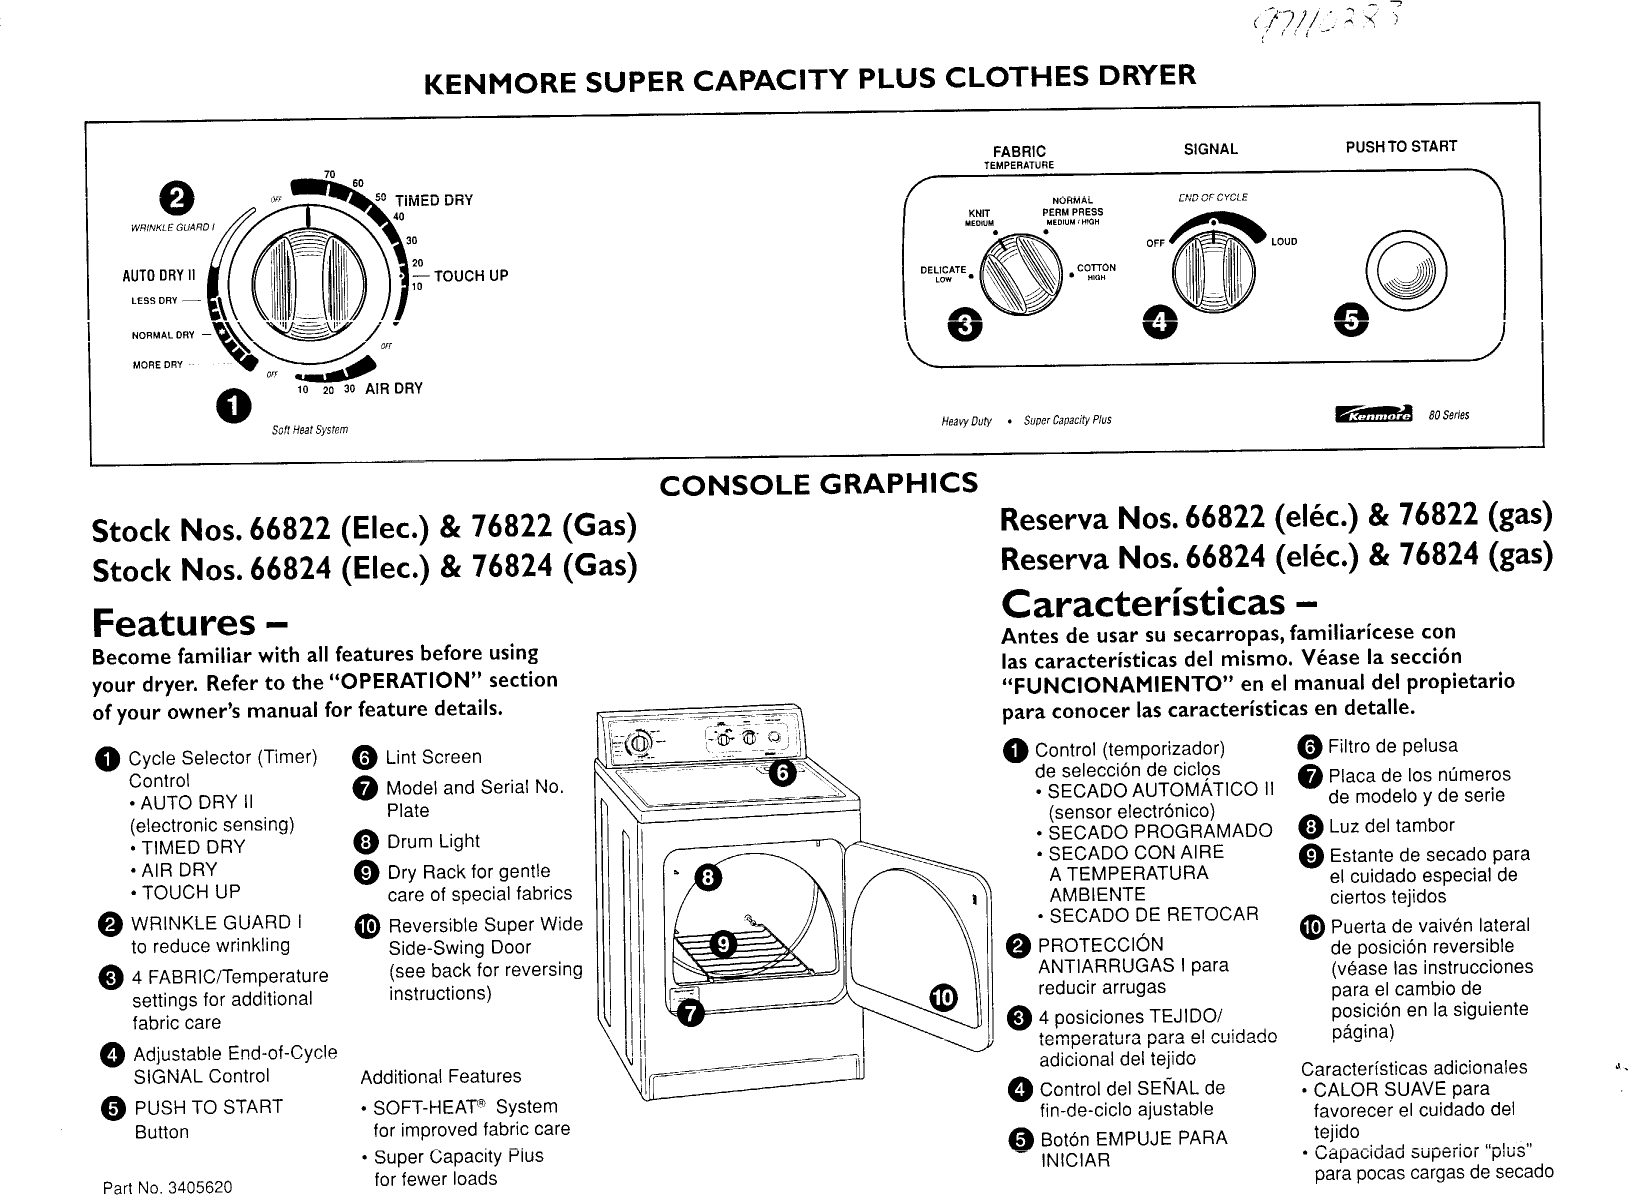 Page 1 of 1 - Kenmore 11076822690 User Manual  SUPER CAPACITY PLUS CLOTHES DRYER - Manuals And Guides 97110283